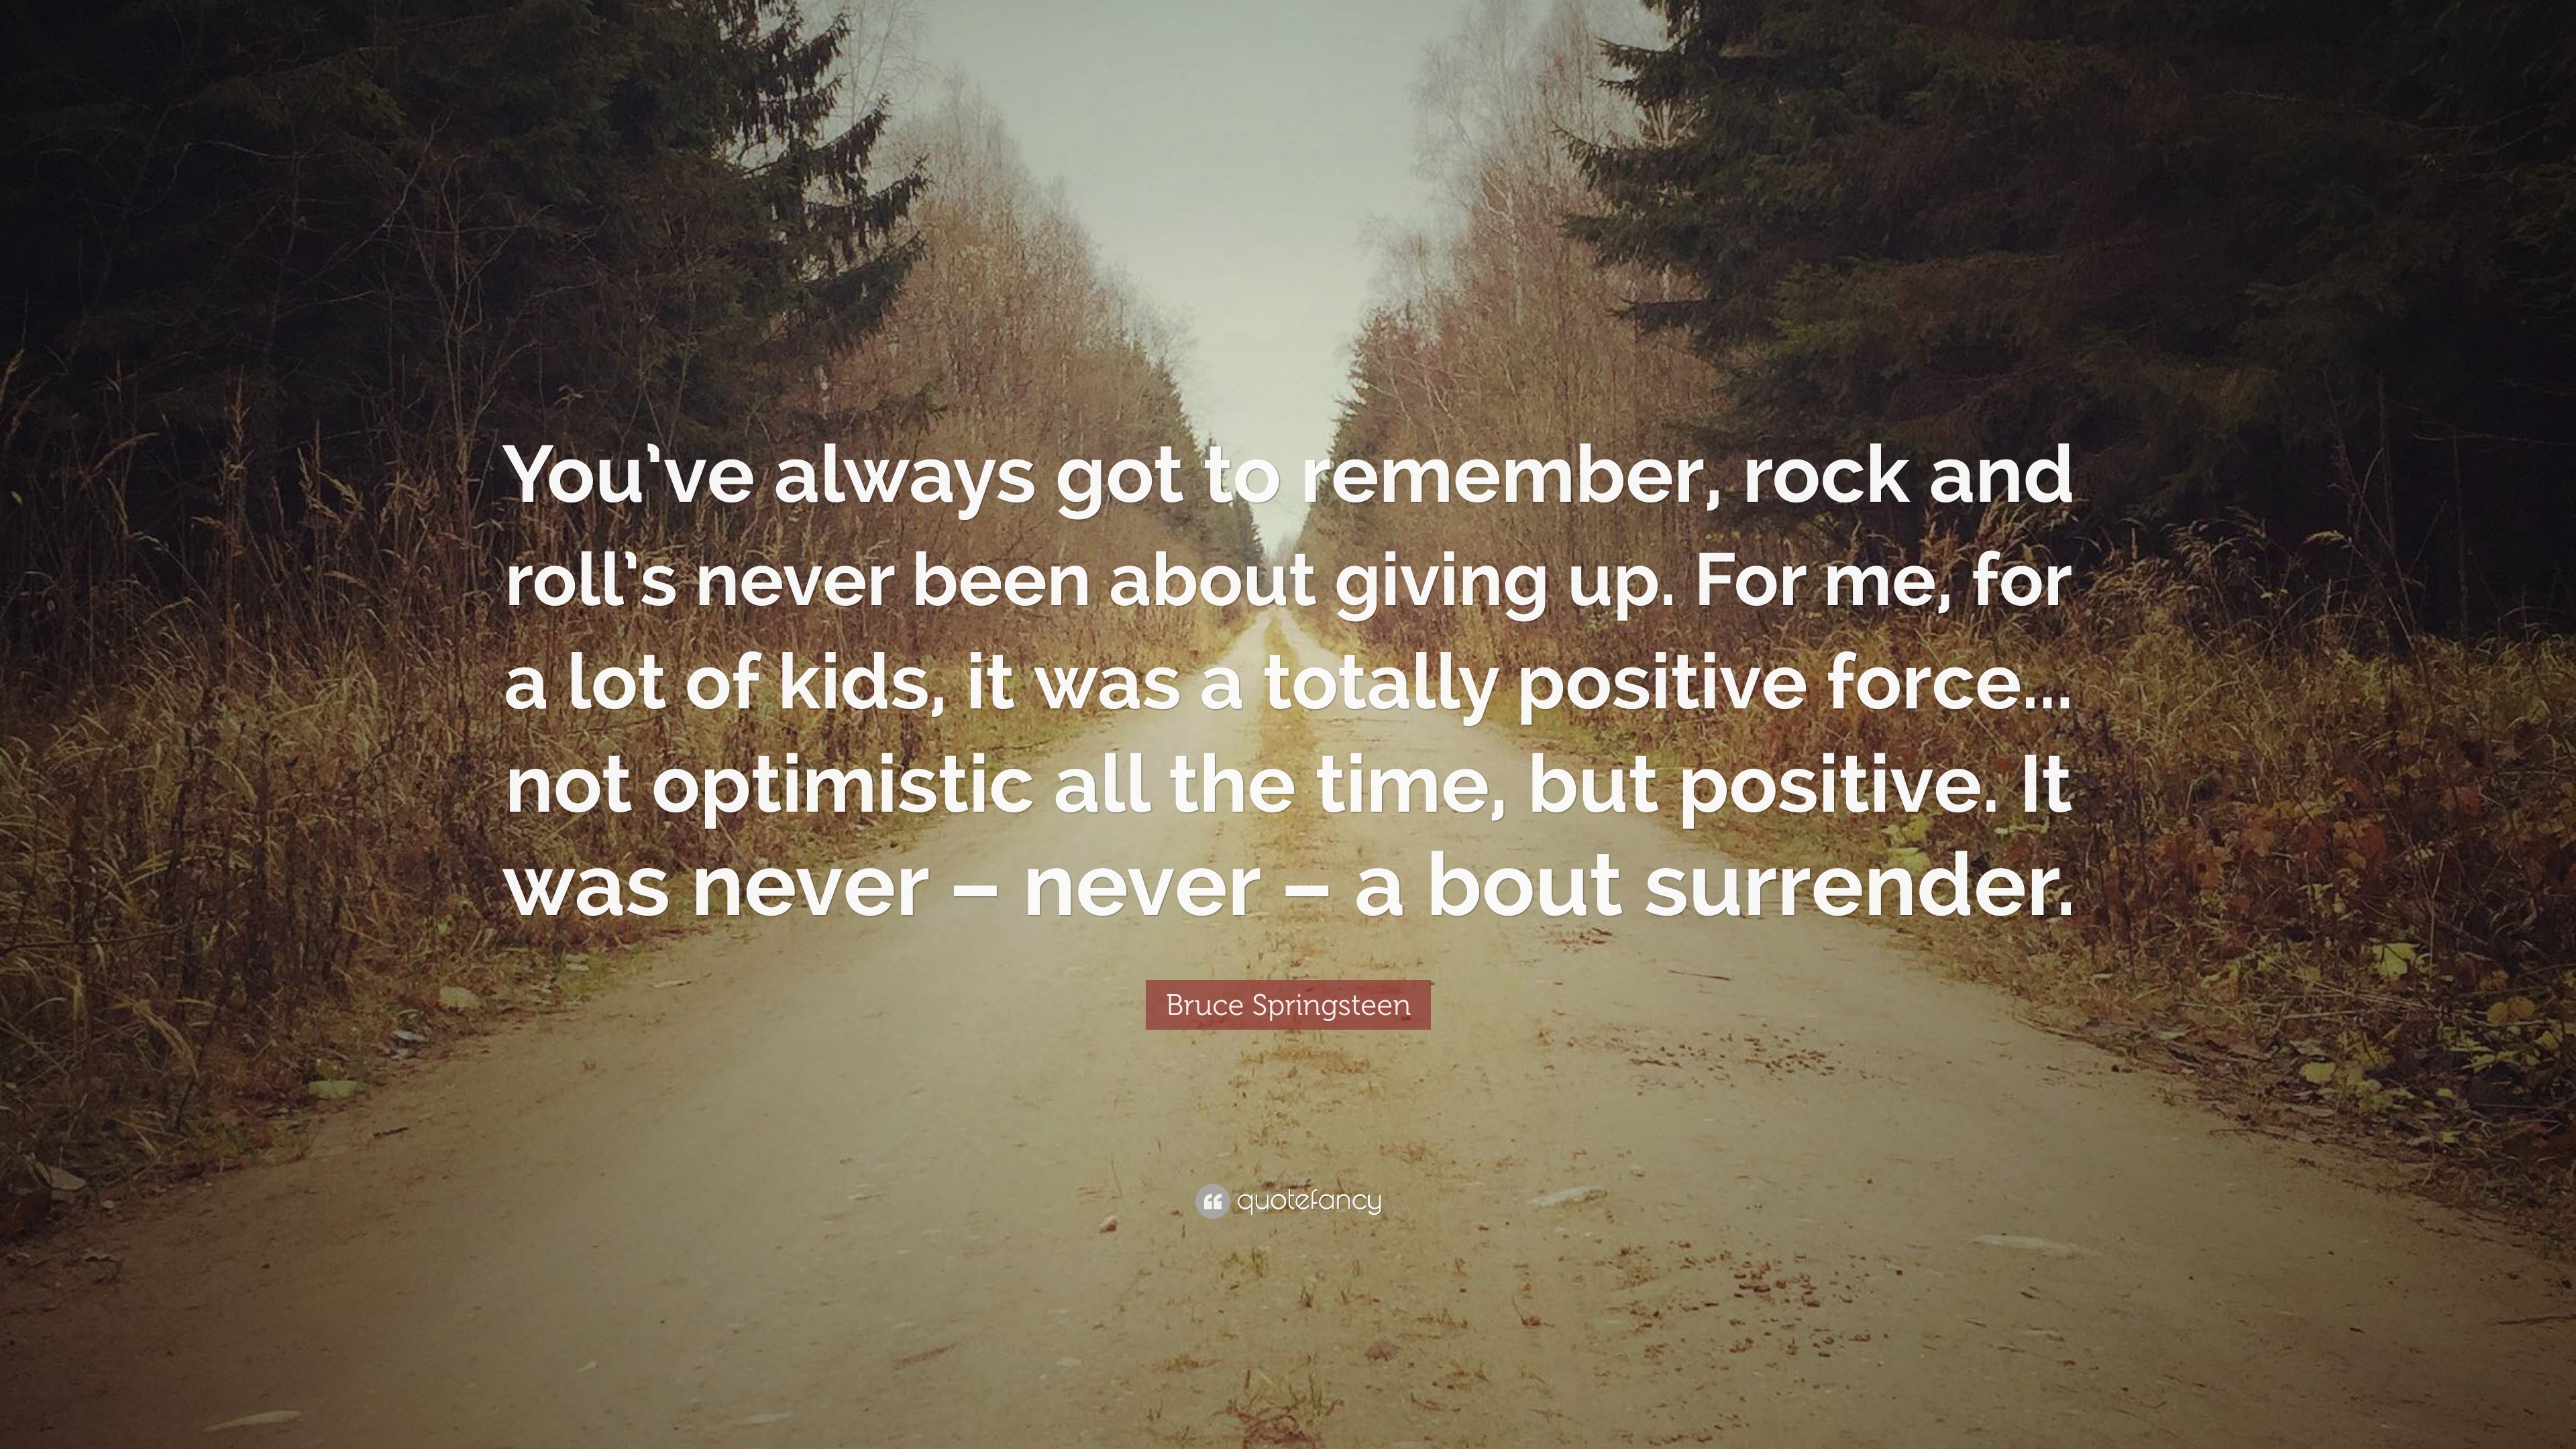 Bruce Springsteen Quote “You ve always got to remember rock and roll s